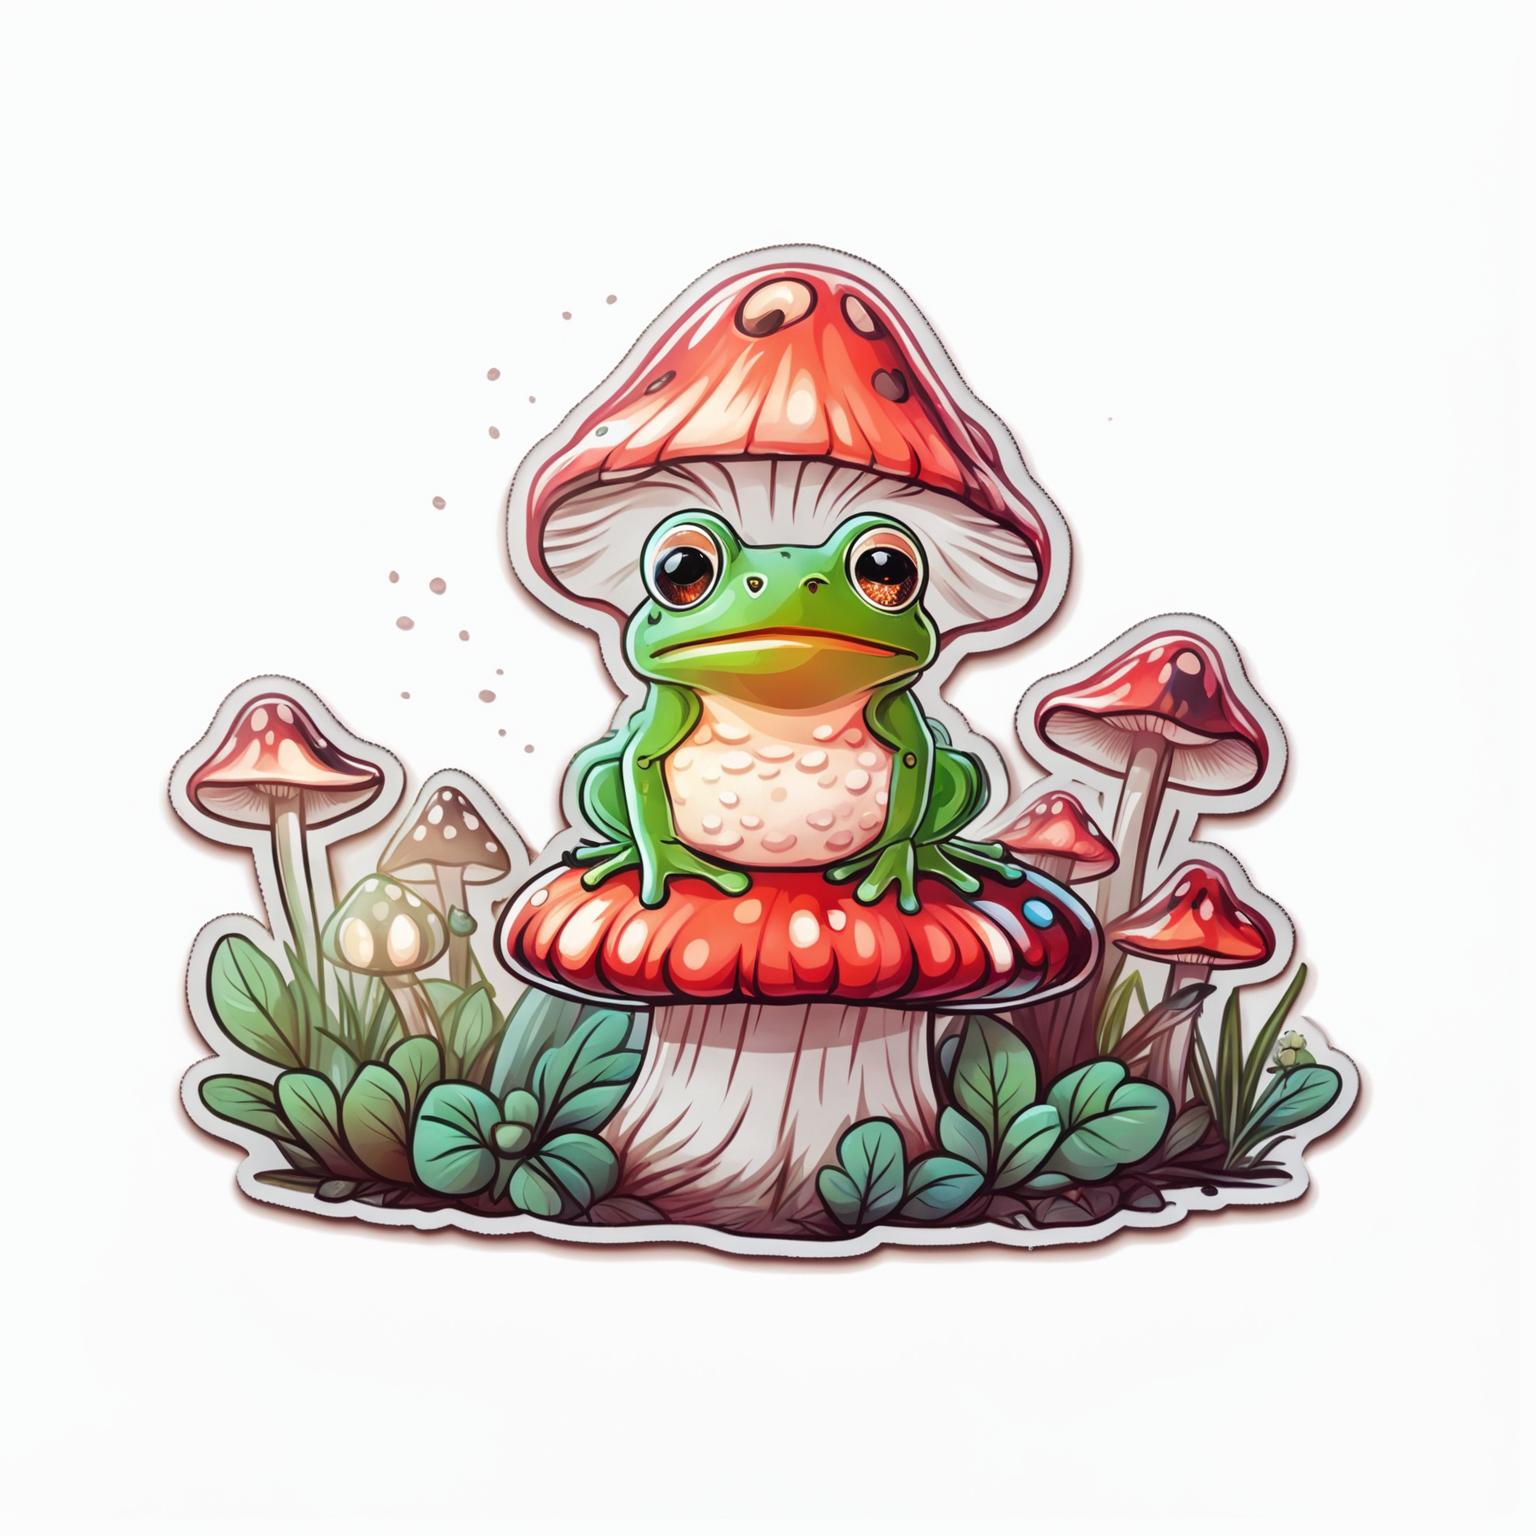 Sticker design of an adorable frog sitting on a mushroom with a cute expression, surrounded by small flowers and grass.